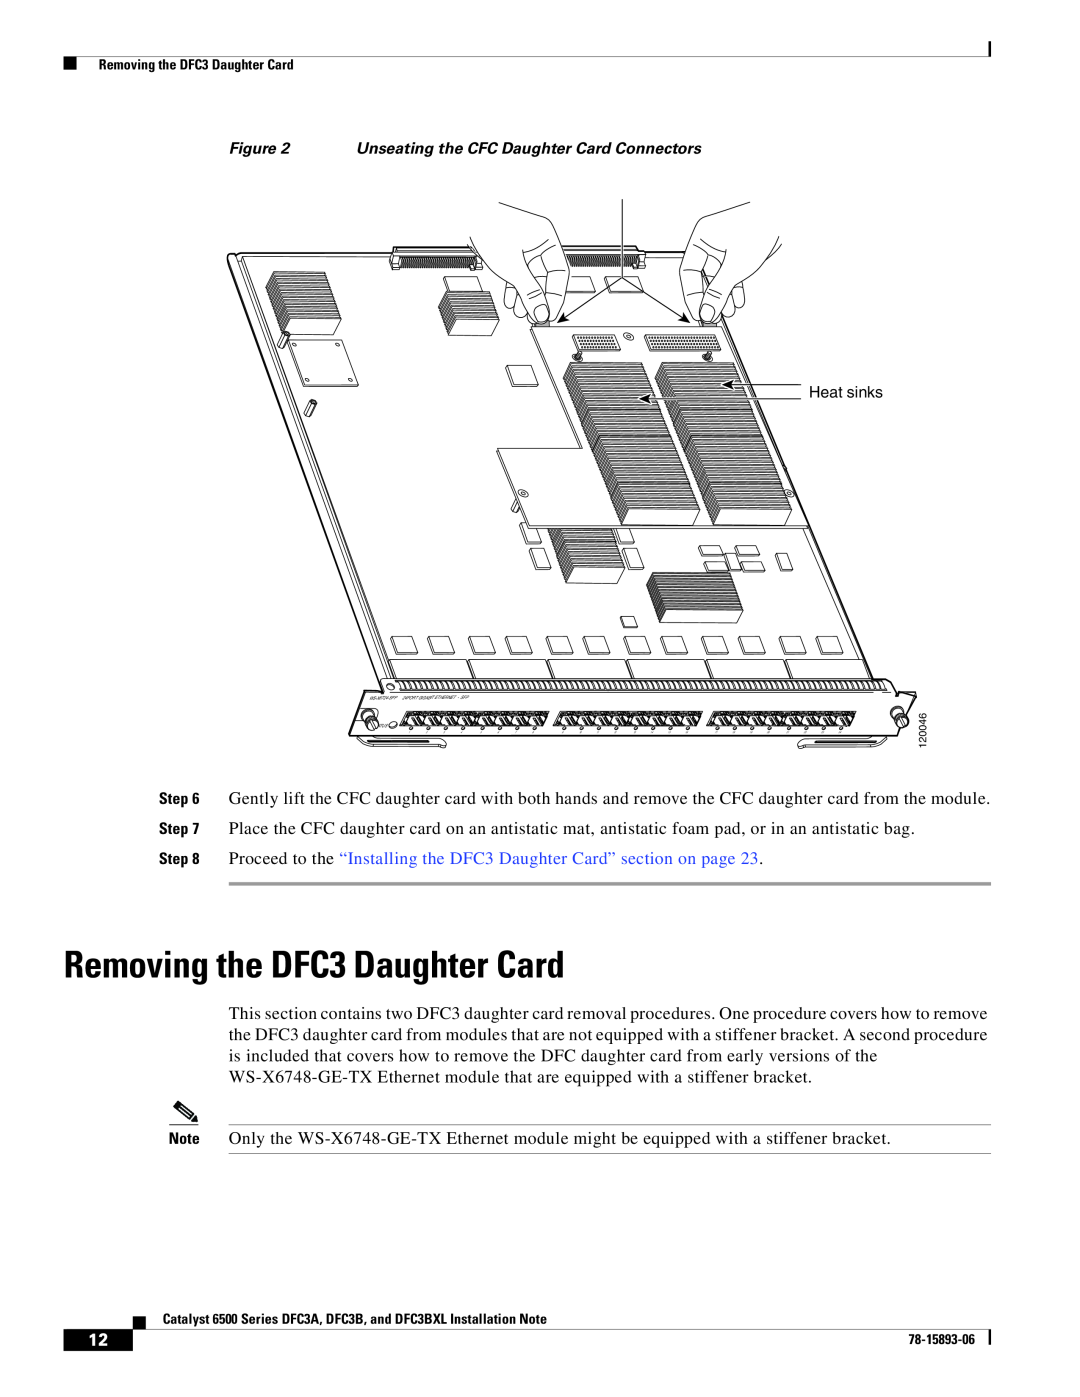 Cisco Systems DFC3BXL, DFC3A manual Removing the DFC3 Daughter Card, Heat sinks 